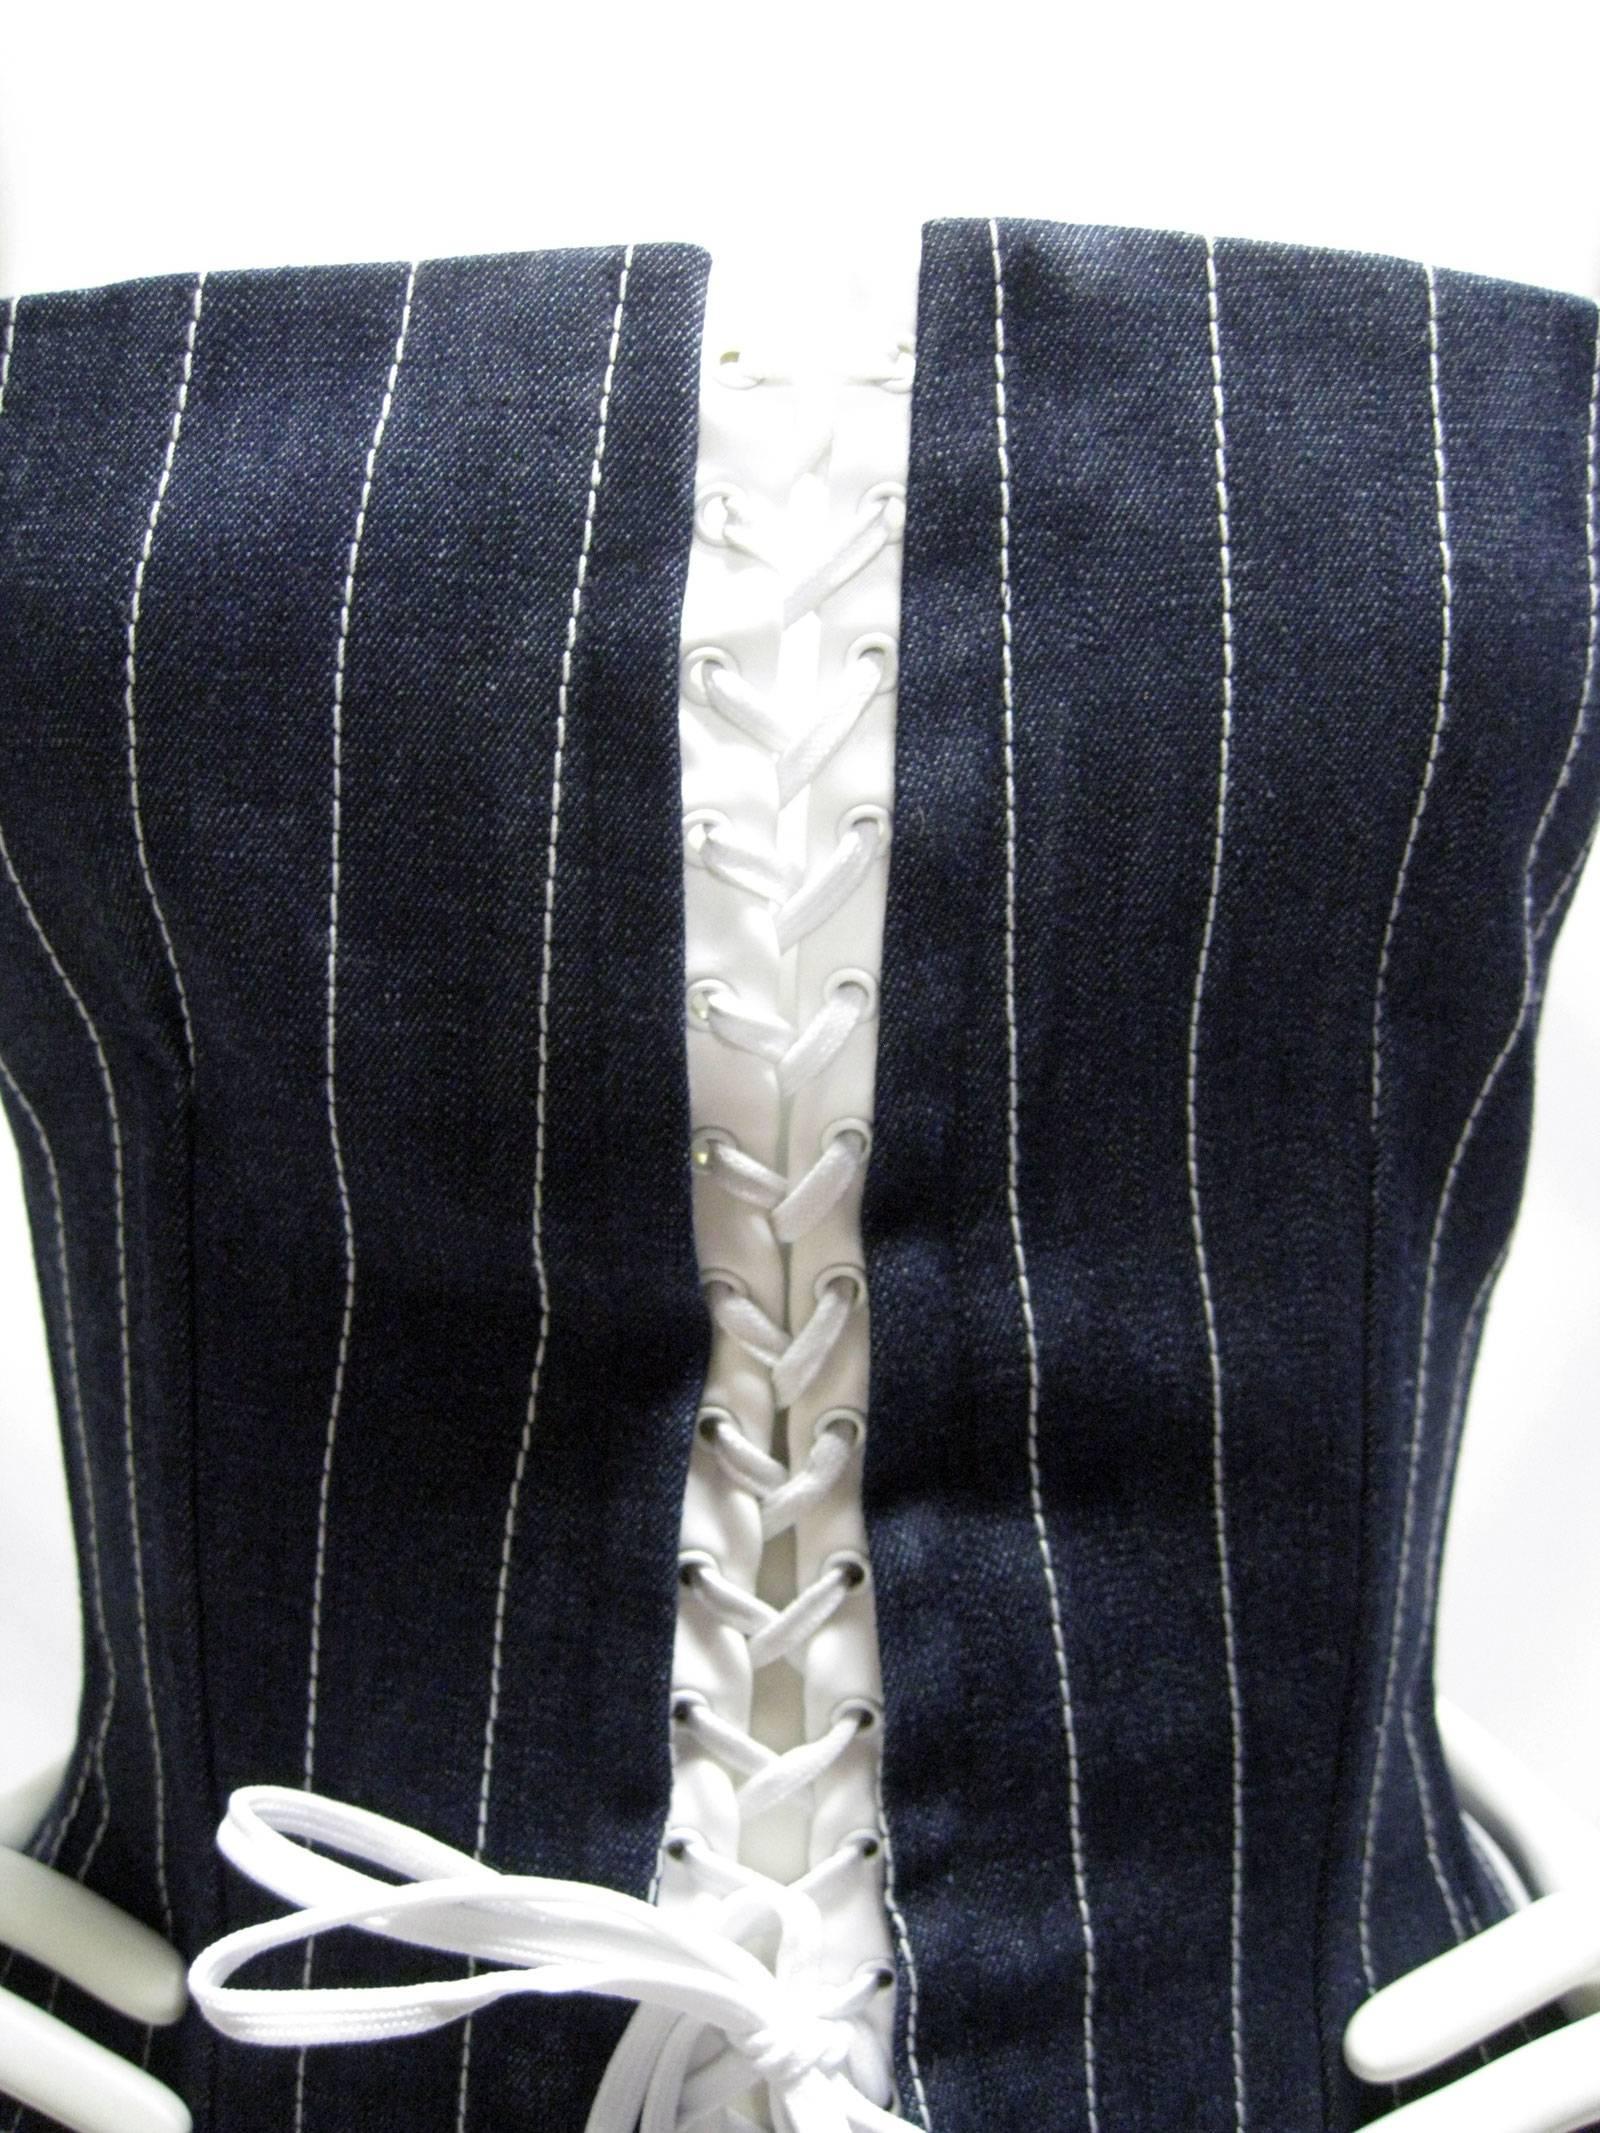 Dolce & Gabbana dark denim corset.
Circa 1990s.
Very dark blue, raw denim. 
White stitching pin stripes.
White stretchy laces with grommeted holes.
Side boning, substantial weight and structure.
Lower hip area is padded around the back and hip